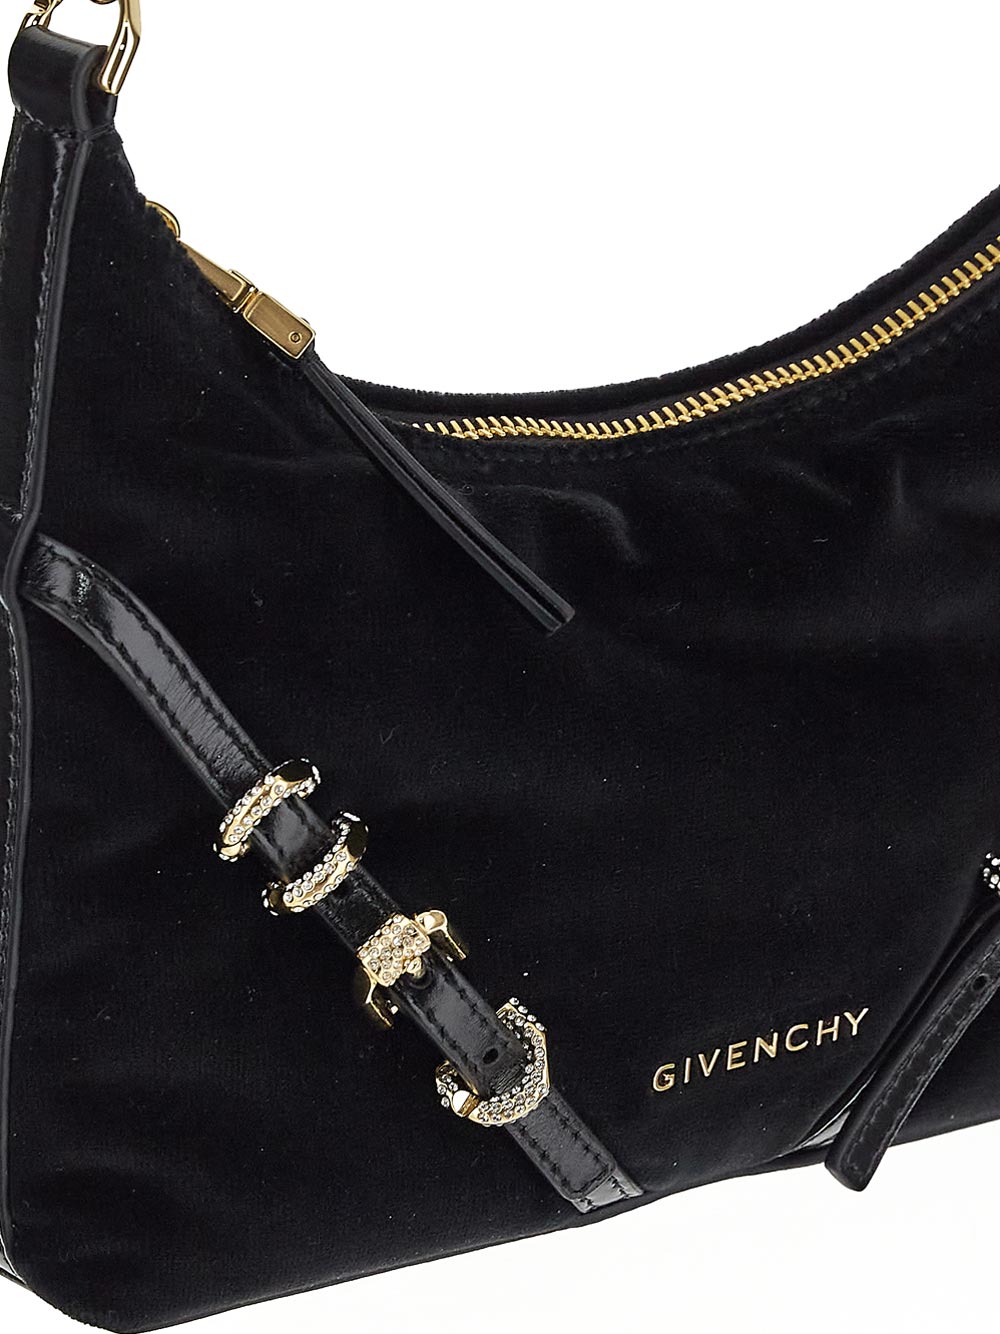 Givenchy Voyou Party Bag In Laminated Leather